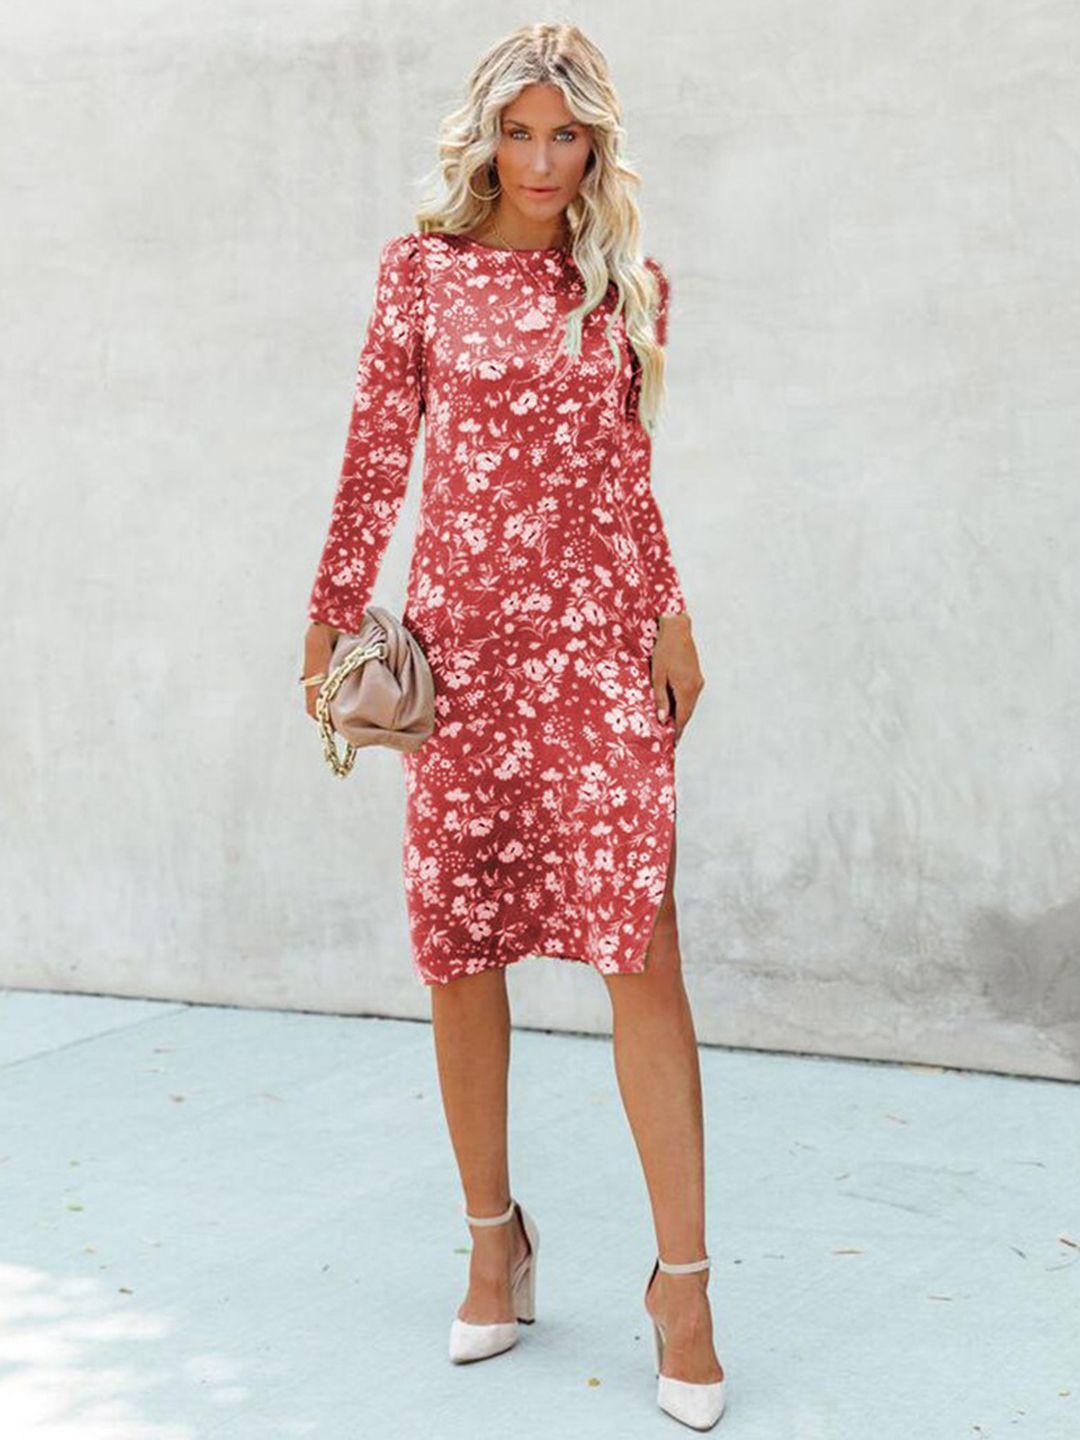 stylecast red floral printed cotton sheath dress